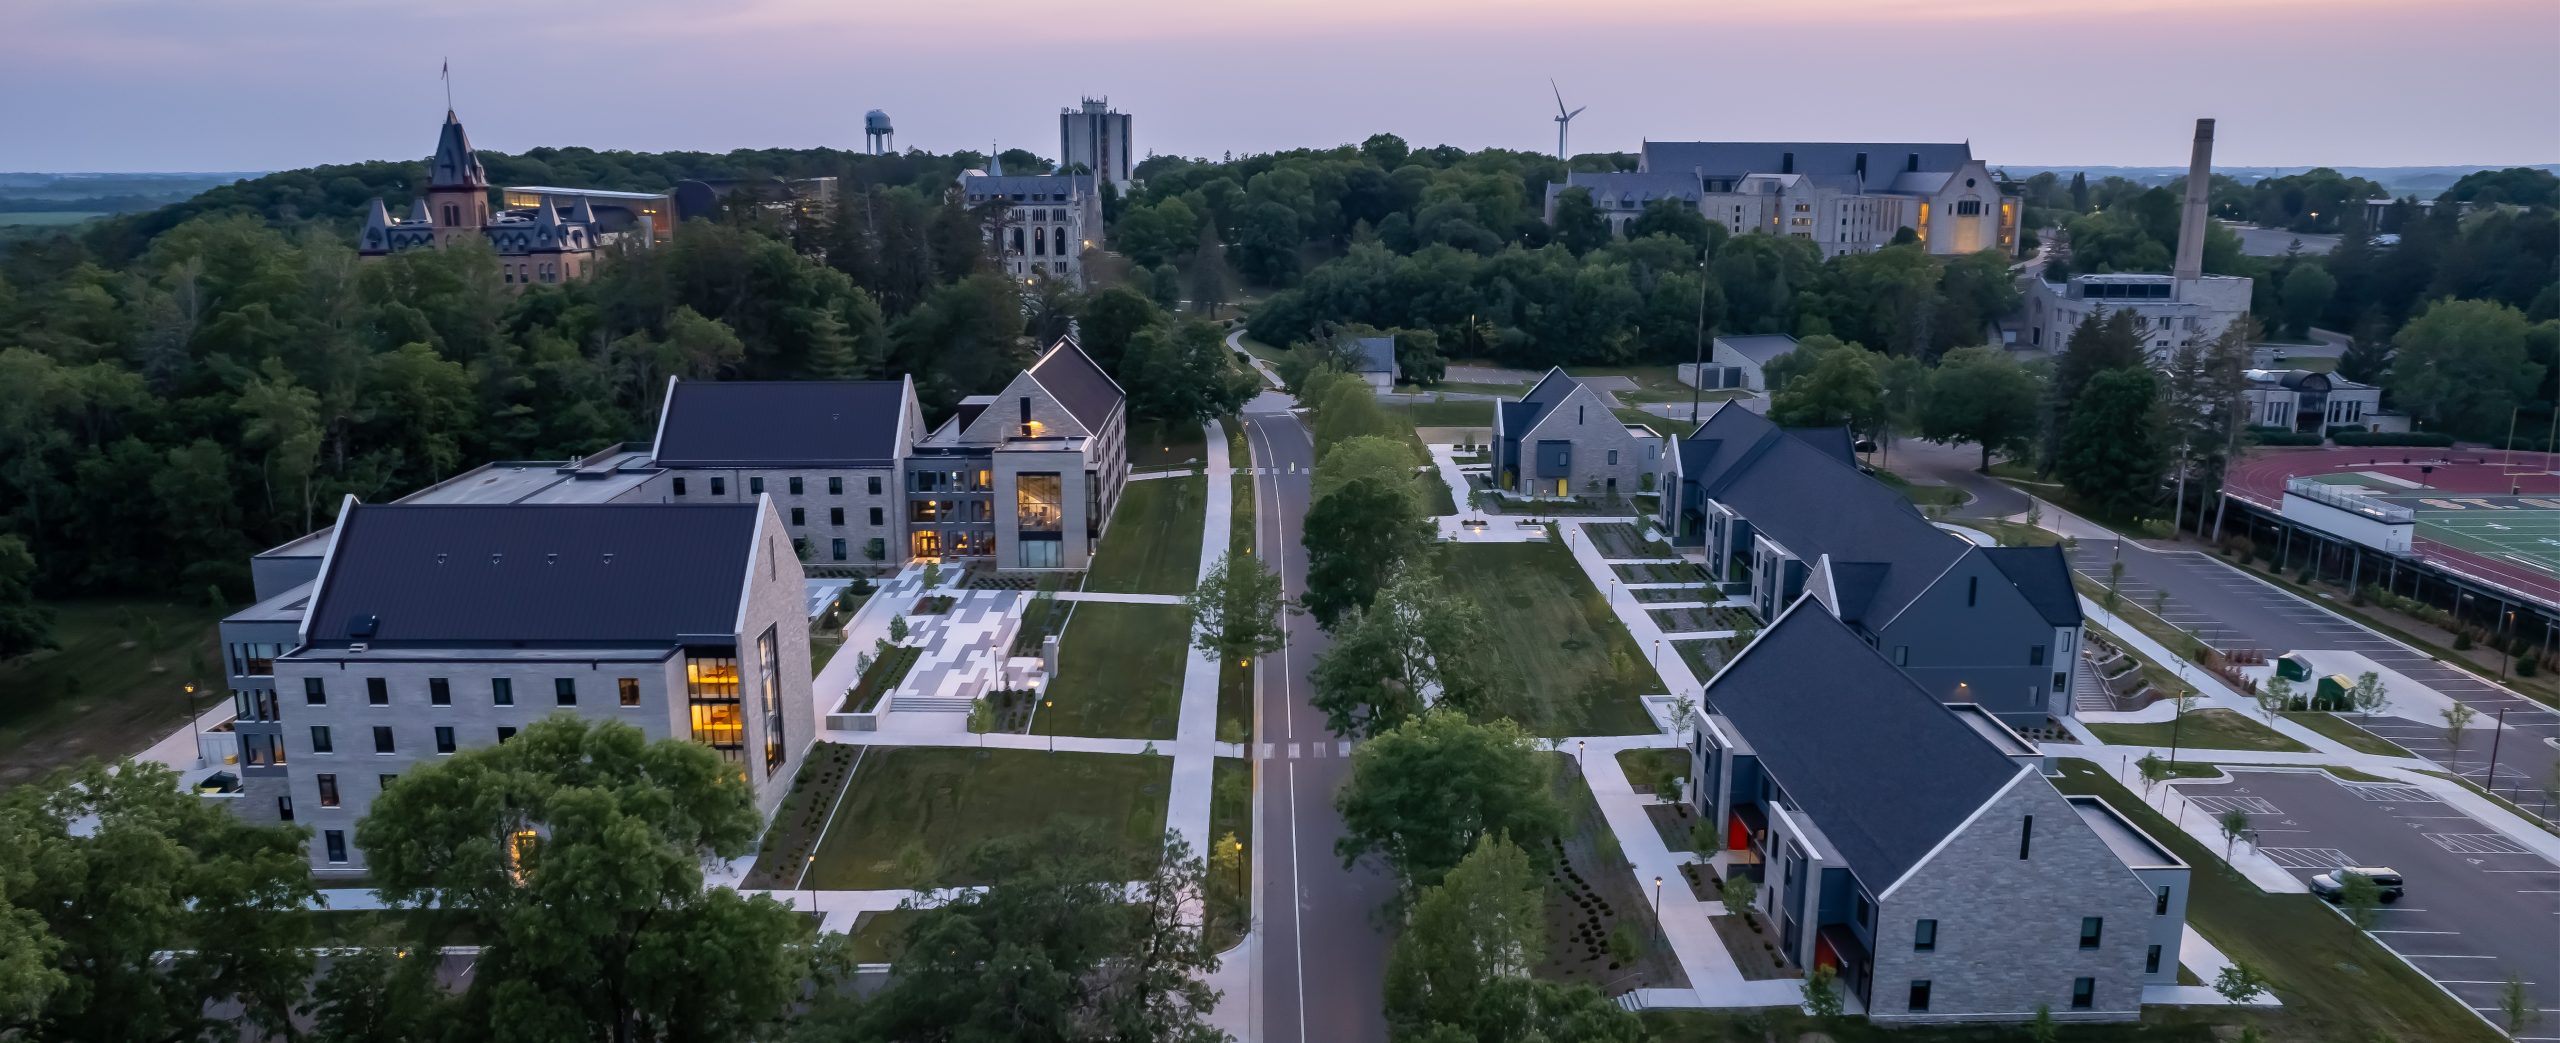 St. Olaf College_Ole Avenue Student Housing_Aerial